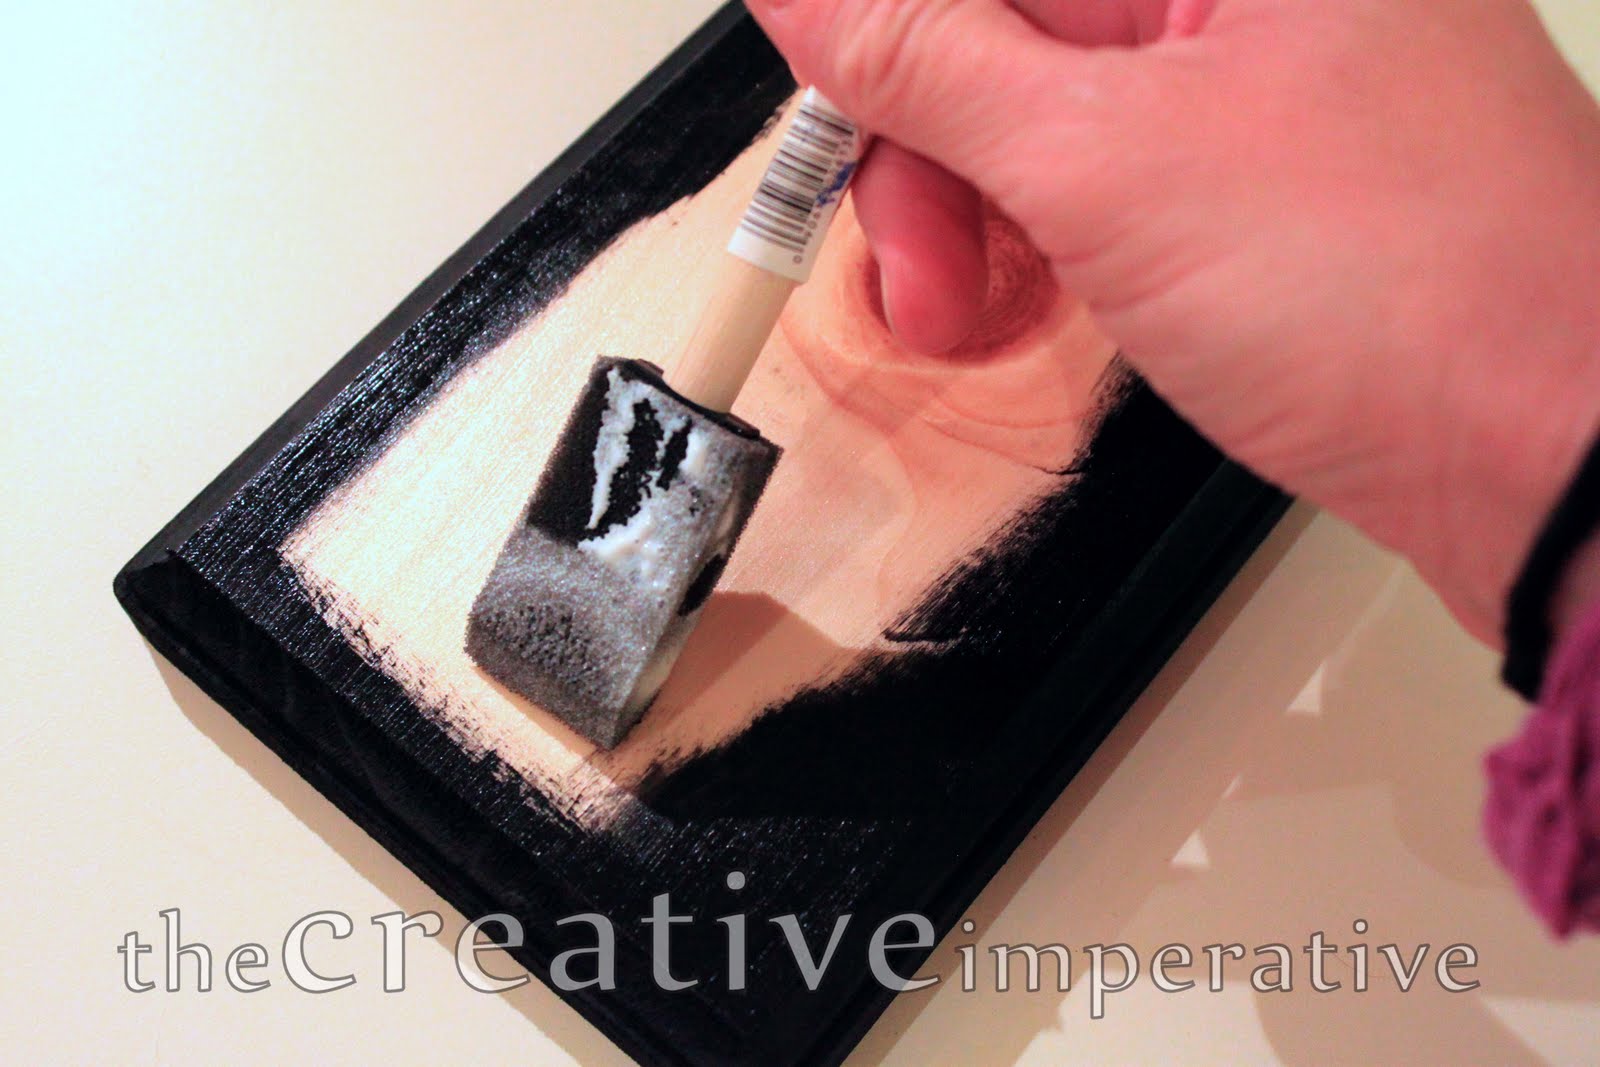 Are mod podge brushes different from foam paint brushes? - Quora